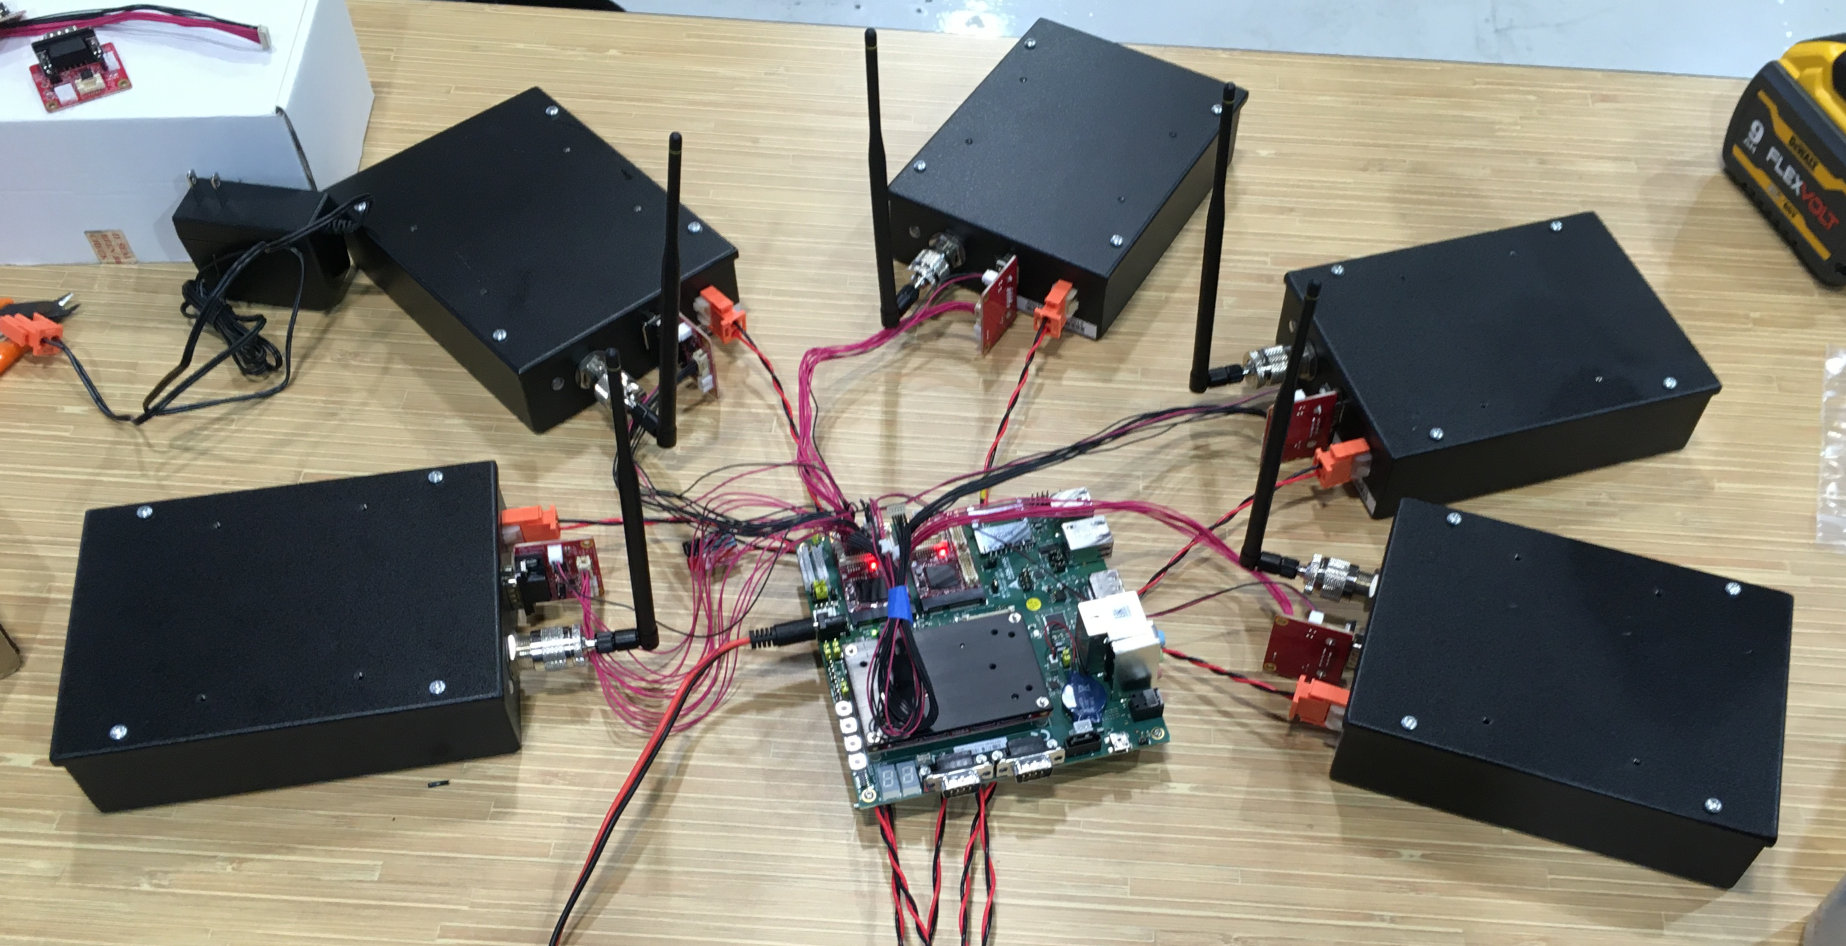 Five ICR-900 modems spread around and connected to Adlink carrier board on office table.